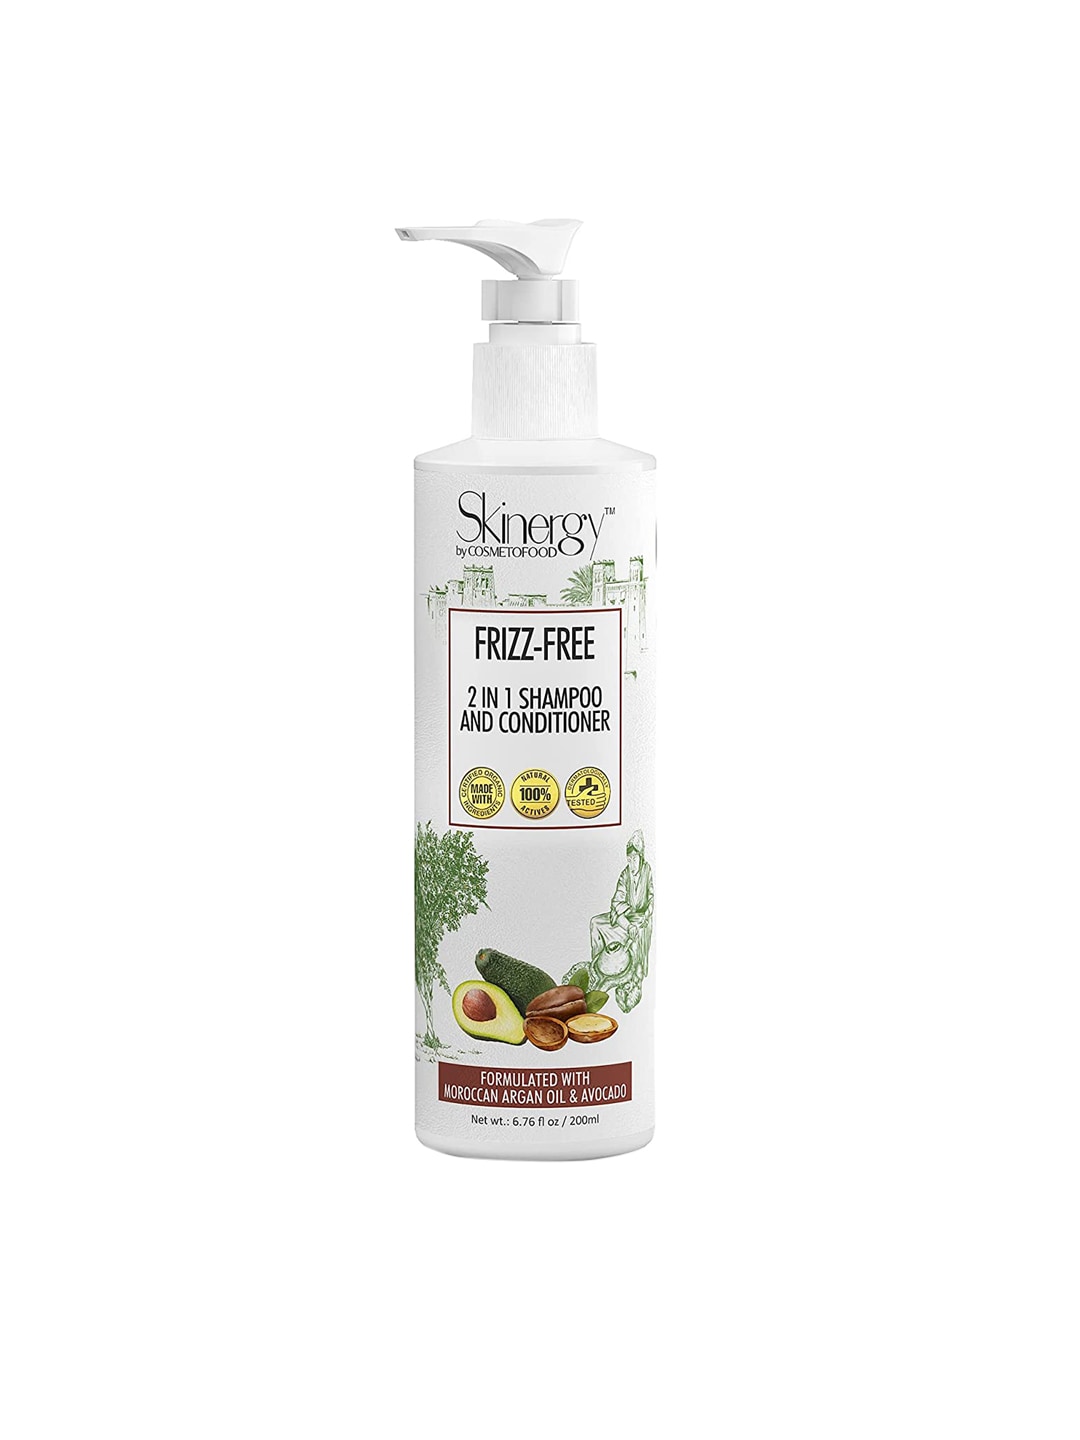 COSMETOFOOD Skinergy Frizz-Free 2 in 1 Shampoo & Conditioner With Moroccan Avocado 200 ml Price in India